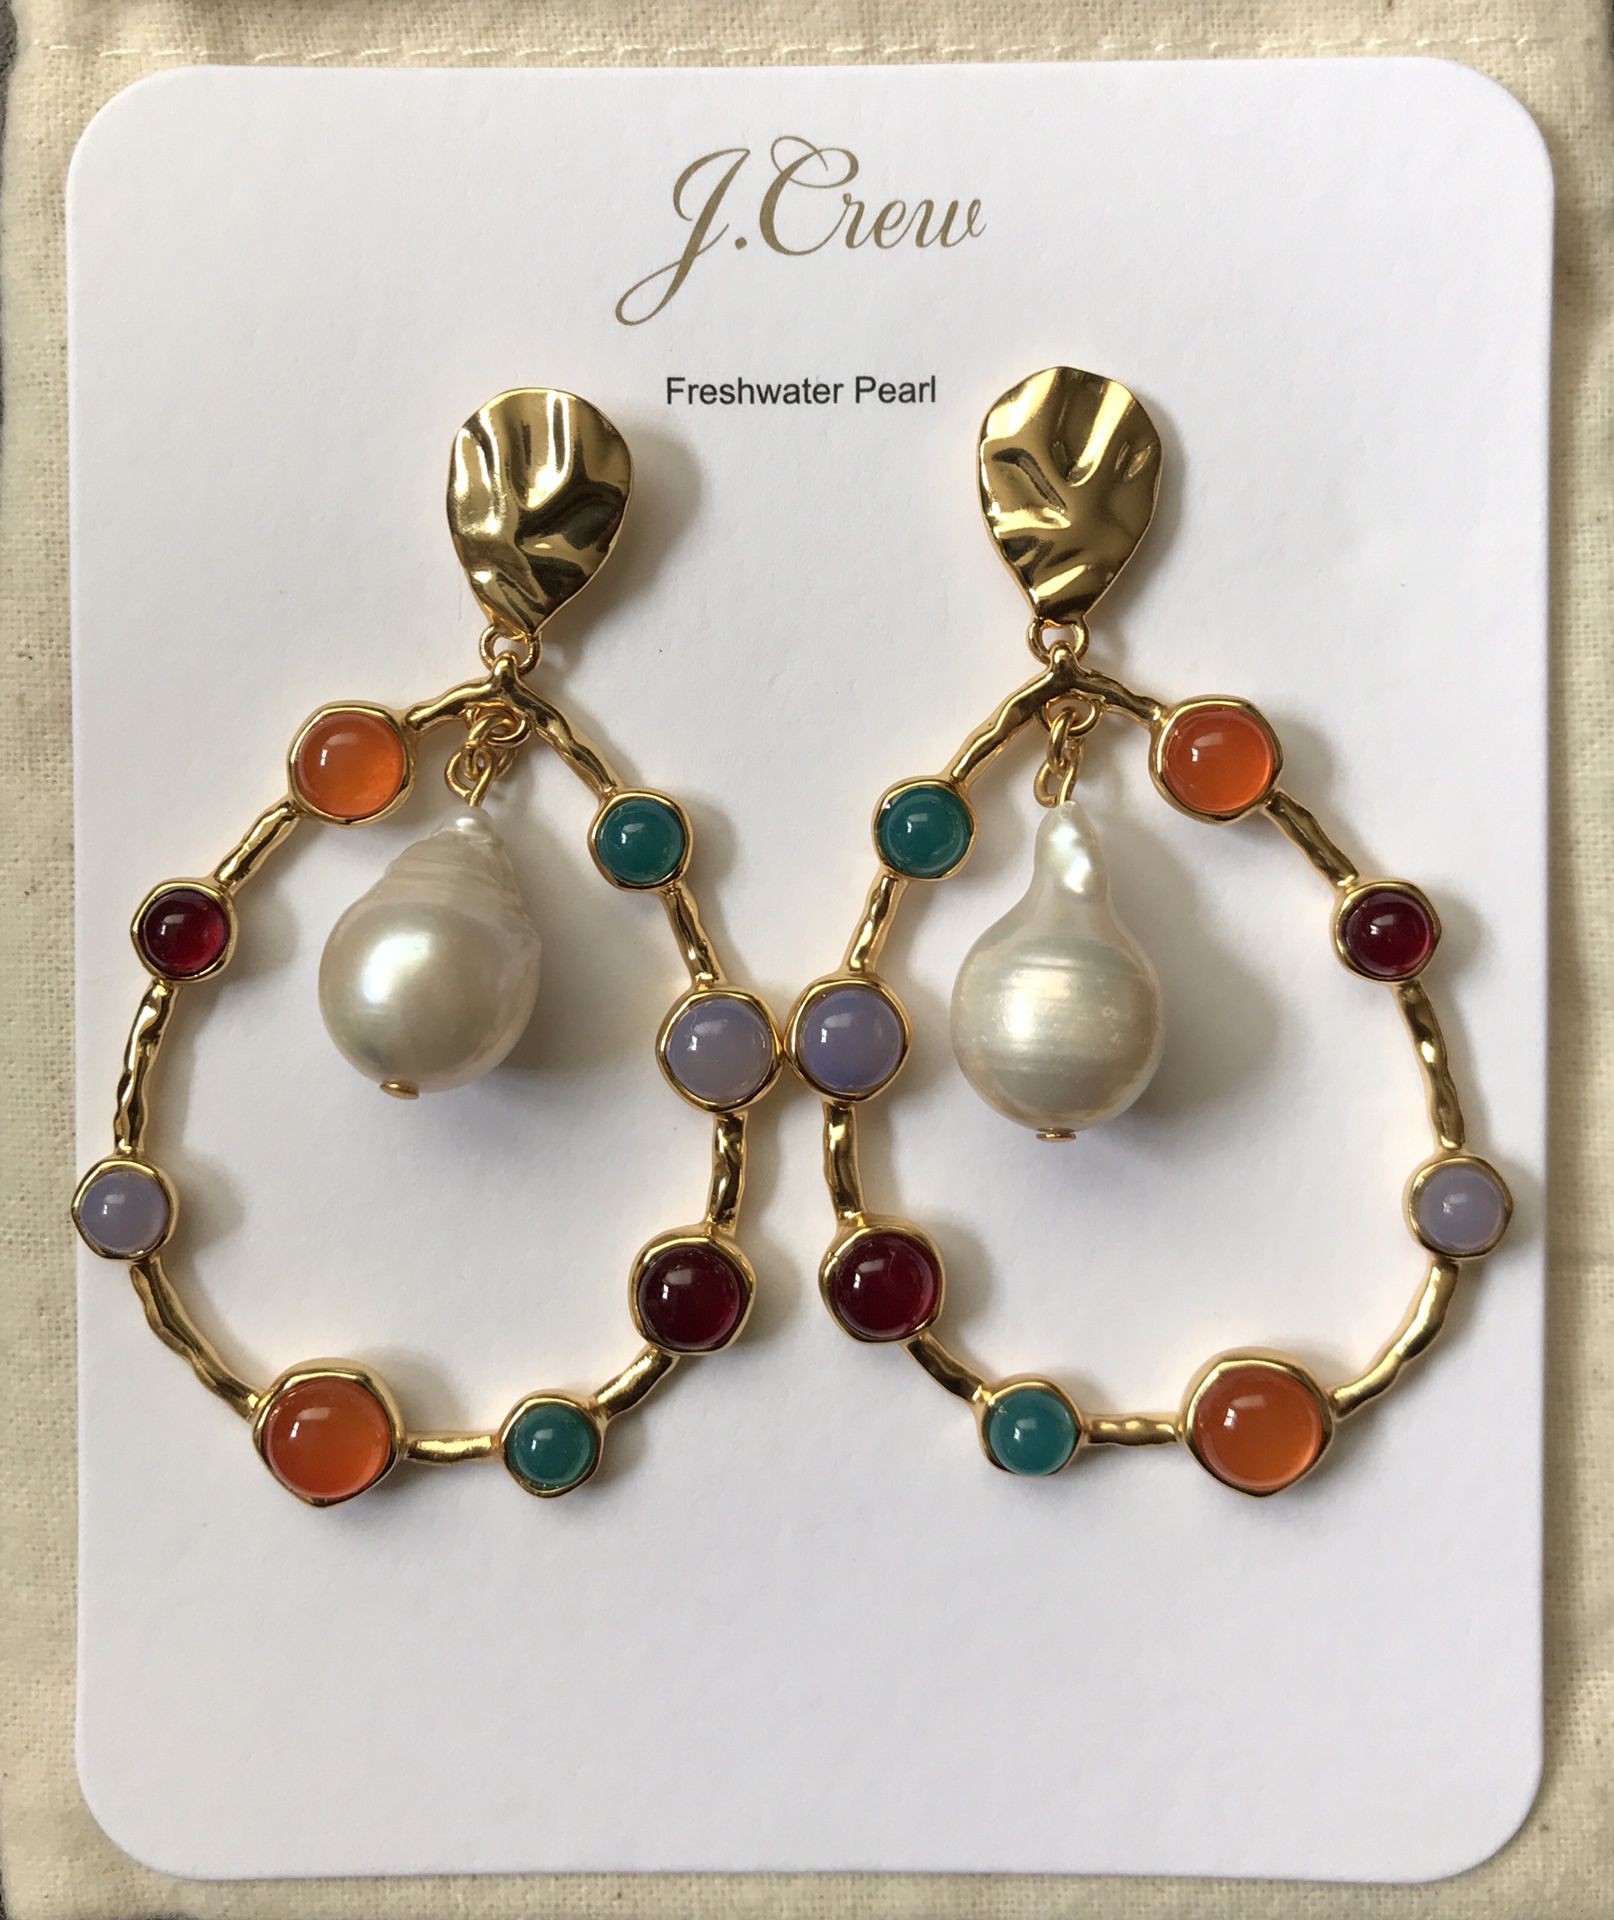 (NEW) (1 AVAILABLE) WOMEN’S J.CREW SEMI-PRECIOUS STONE STATEMENT EARRINGS - SIZE: 2” (MSRP: $68) 